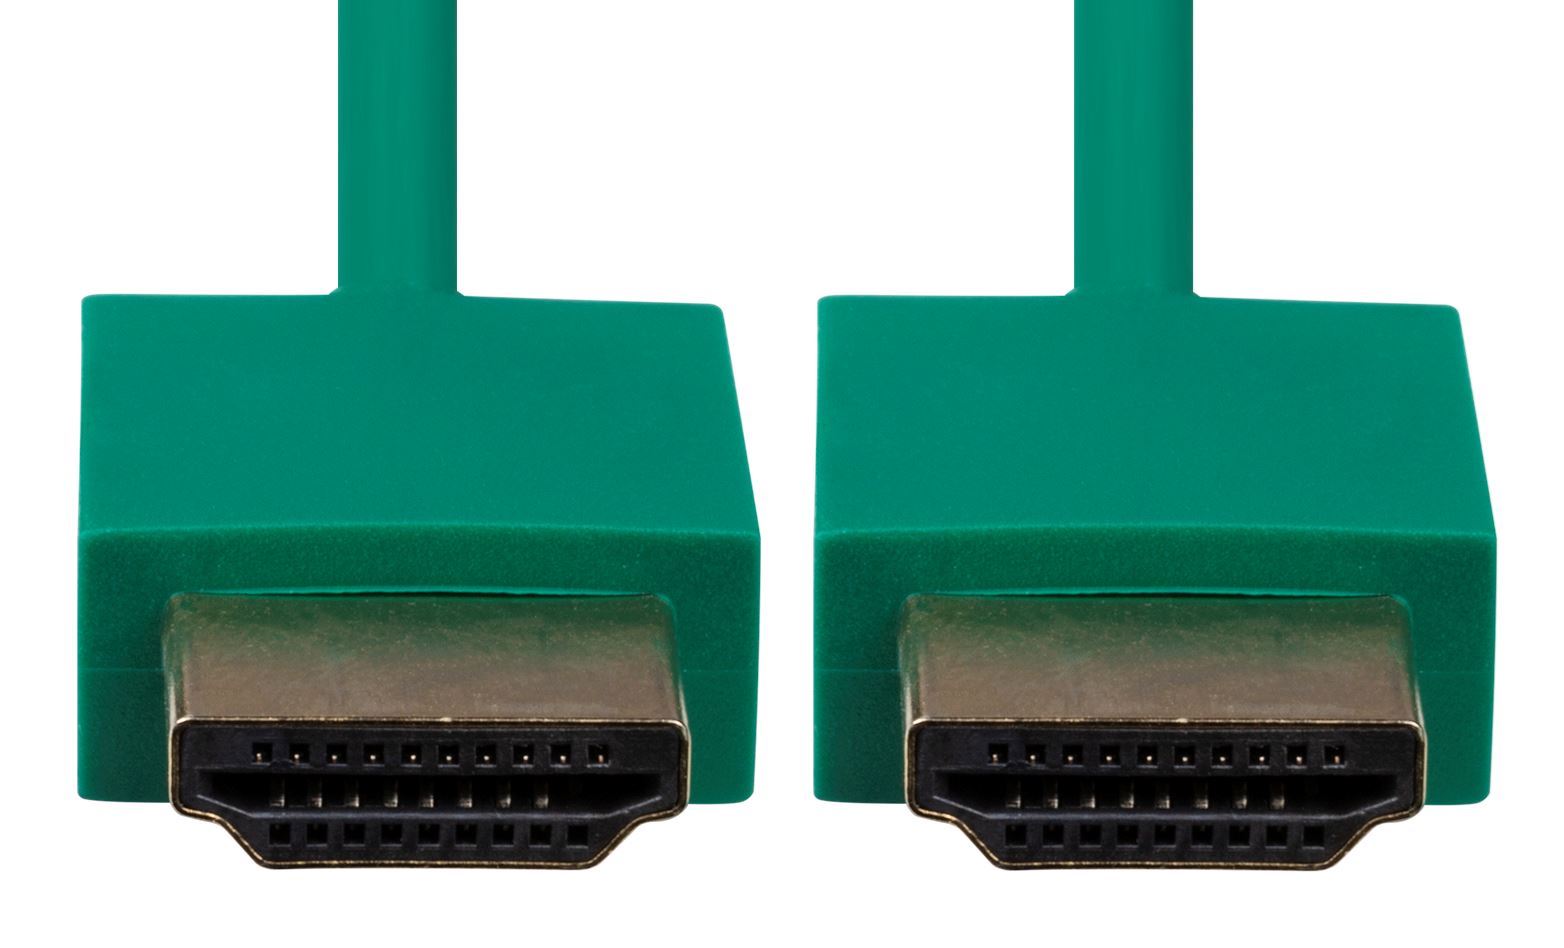 DYNAMIX_0.5M_HDMI_GREEN_Nano_High_Speed_With_Ethernet_Cable._Designed_for_UHD_Display_up_to_4K2K@60Hz._Slimline_Robust_Cable._Supports_CEC_2.0,_3D,_&_ARC._Supports_Up_to_32_Audio_Channels. 752